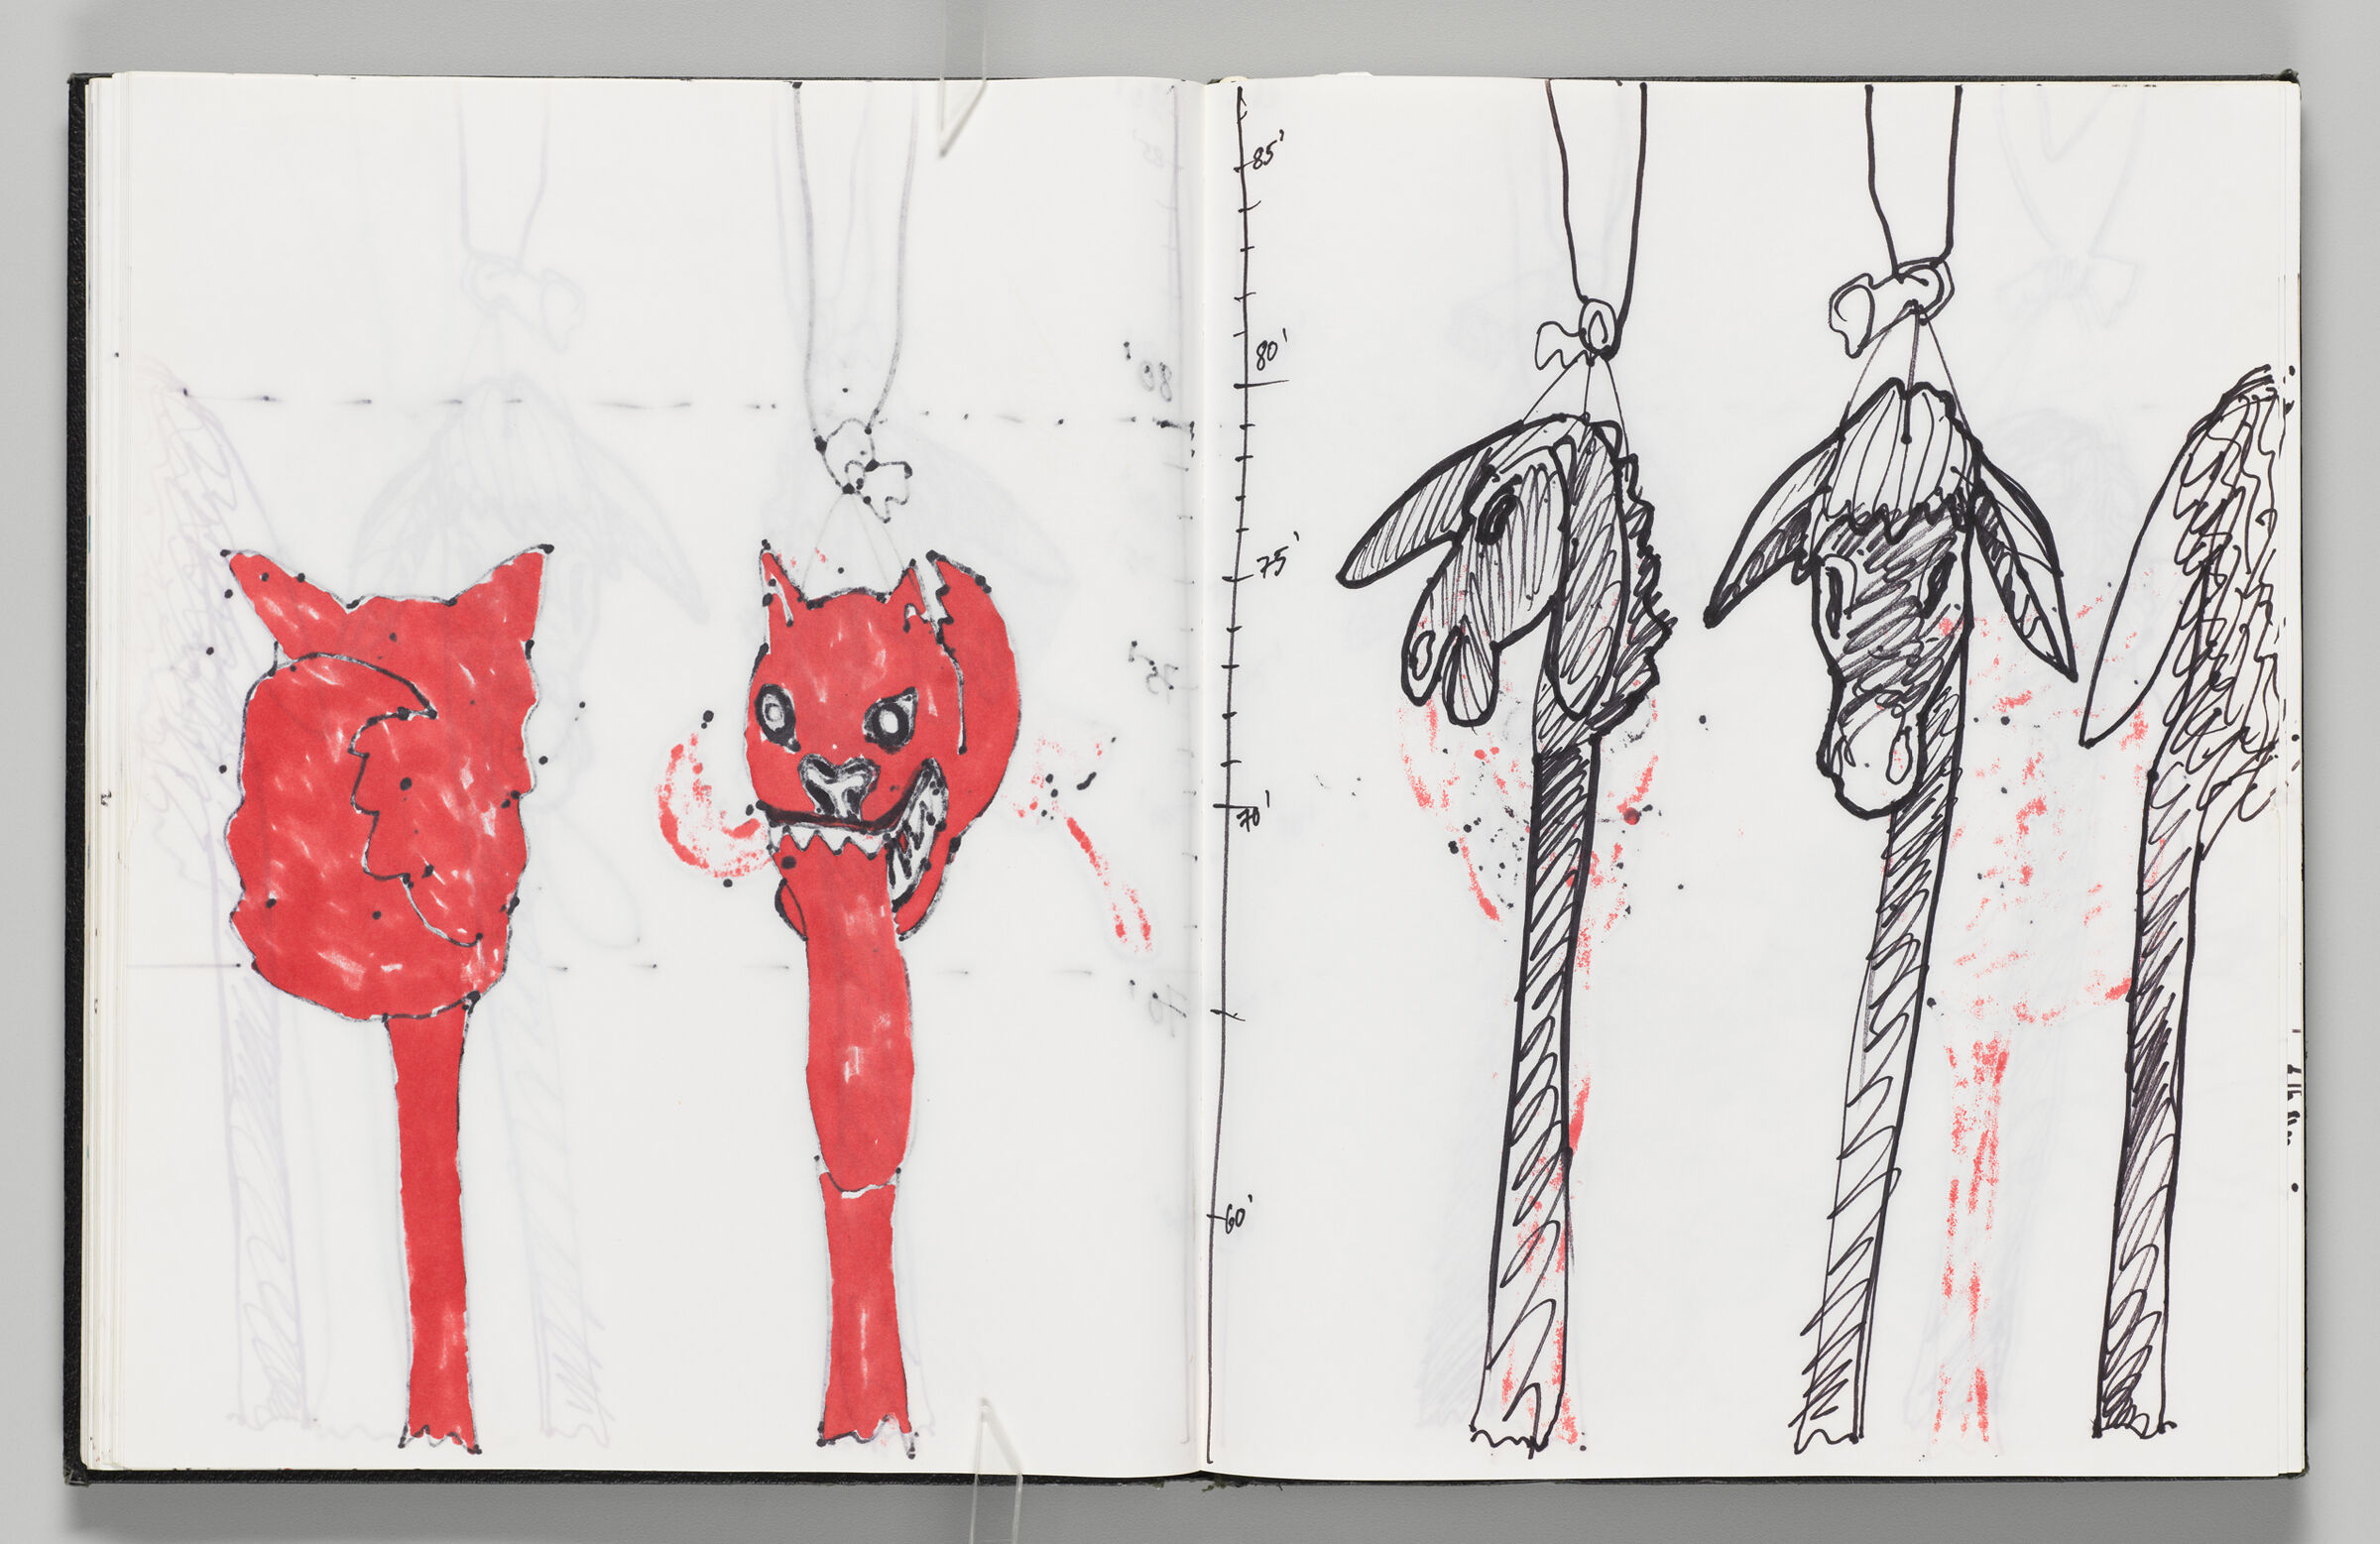 Untitled (Bleed-Through Of Previous Page, Left Page); Untitled (Scale Of Donkey Inflatable With Faint Color Transfer, Right Page)